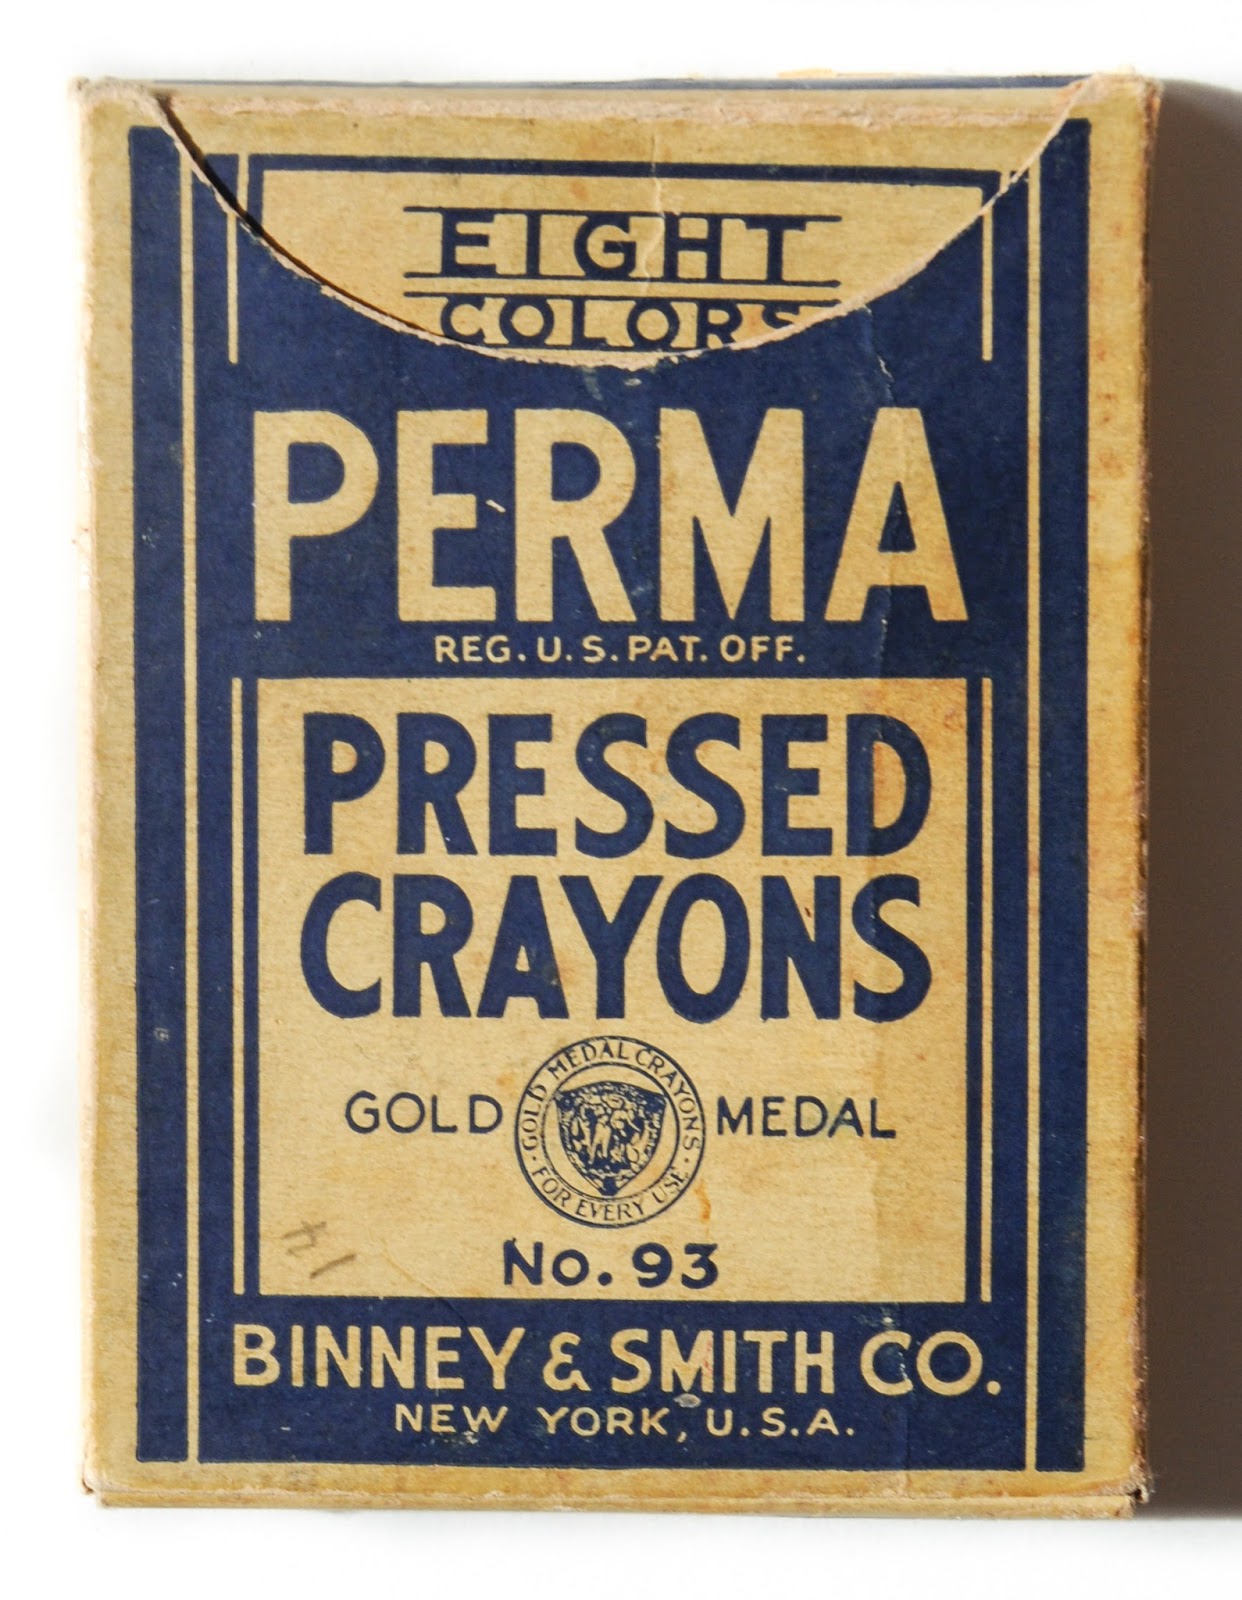 Perma Crayons No. 93: What's Inside the Box